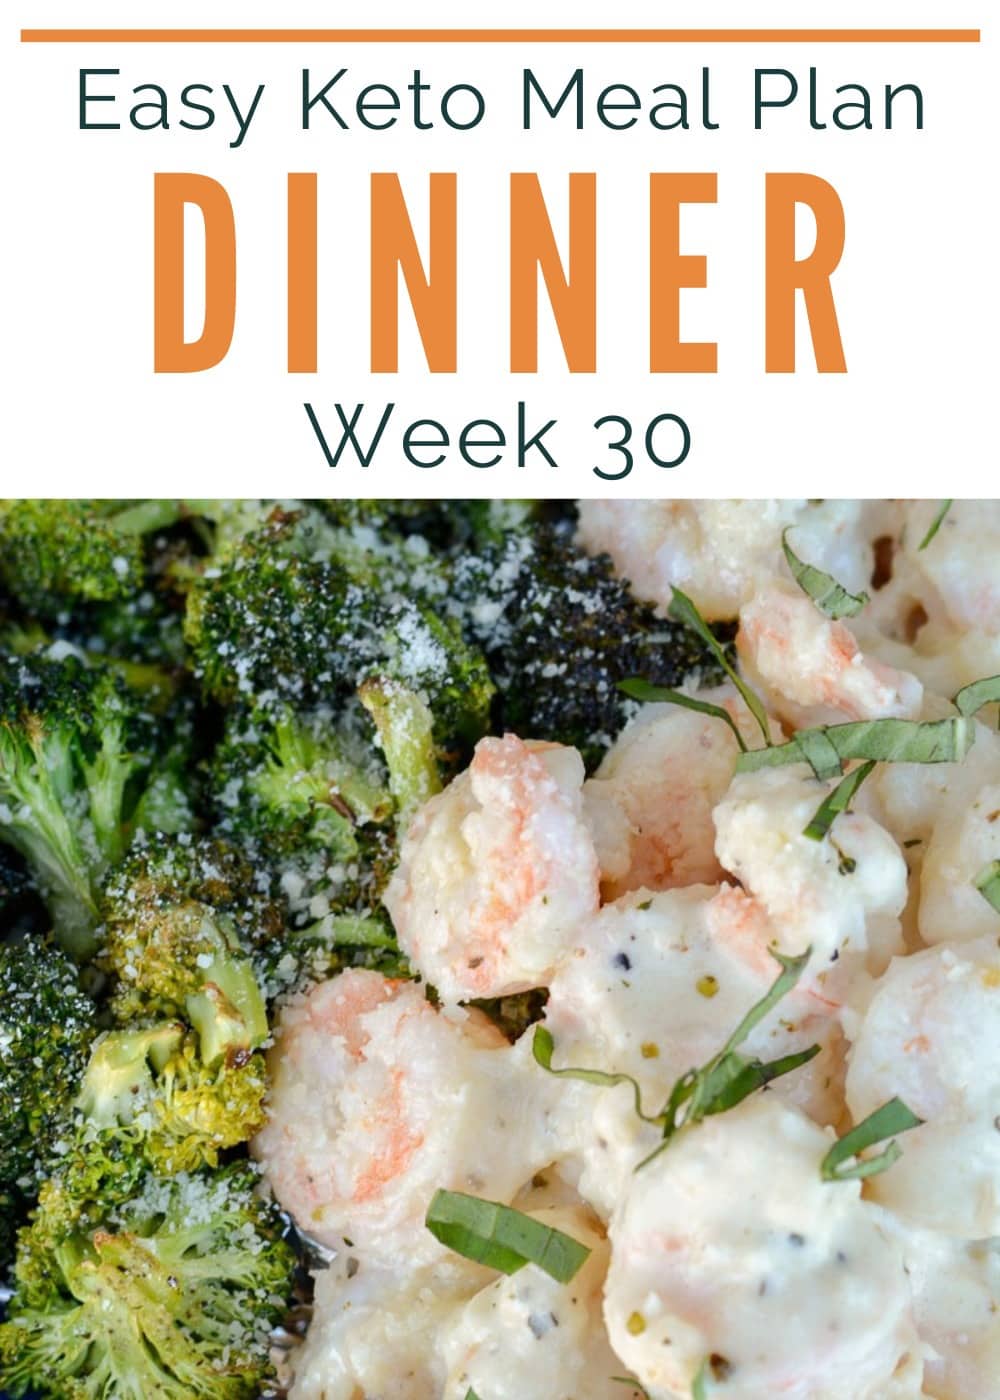 You'll love these 5 keto dinners (under 5 net carbs) and a delicious low-carb dessert in this Easy Keto Meal Plan! Net carb counts, side dish ideas, meal prep tips, and a printable shopping list are included for the easiest keto meal plan ever.